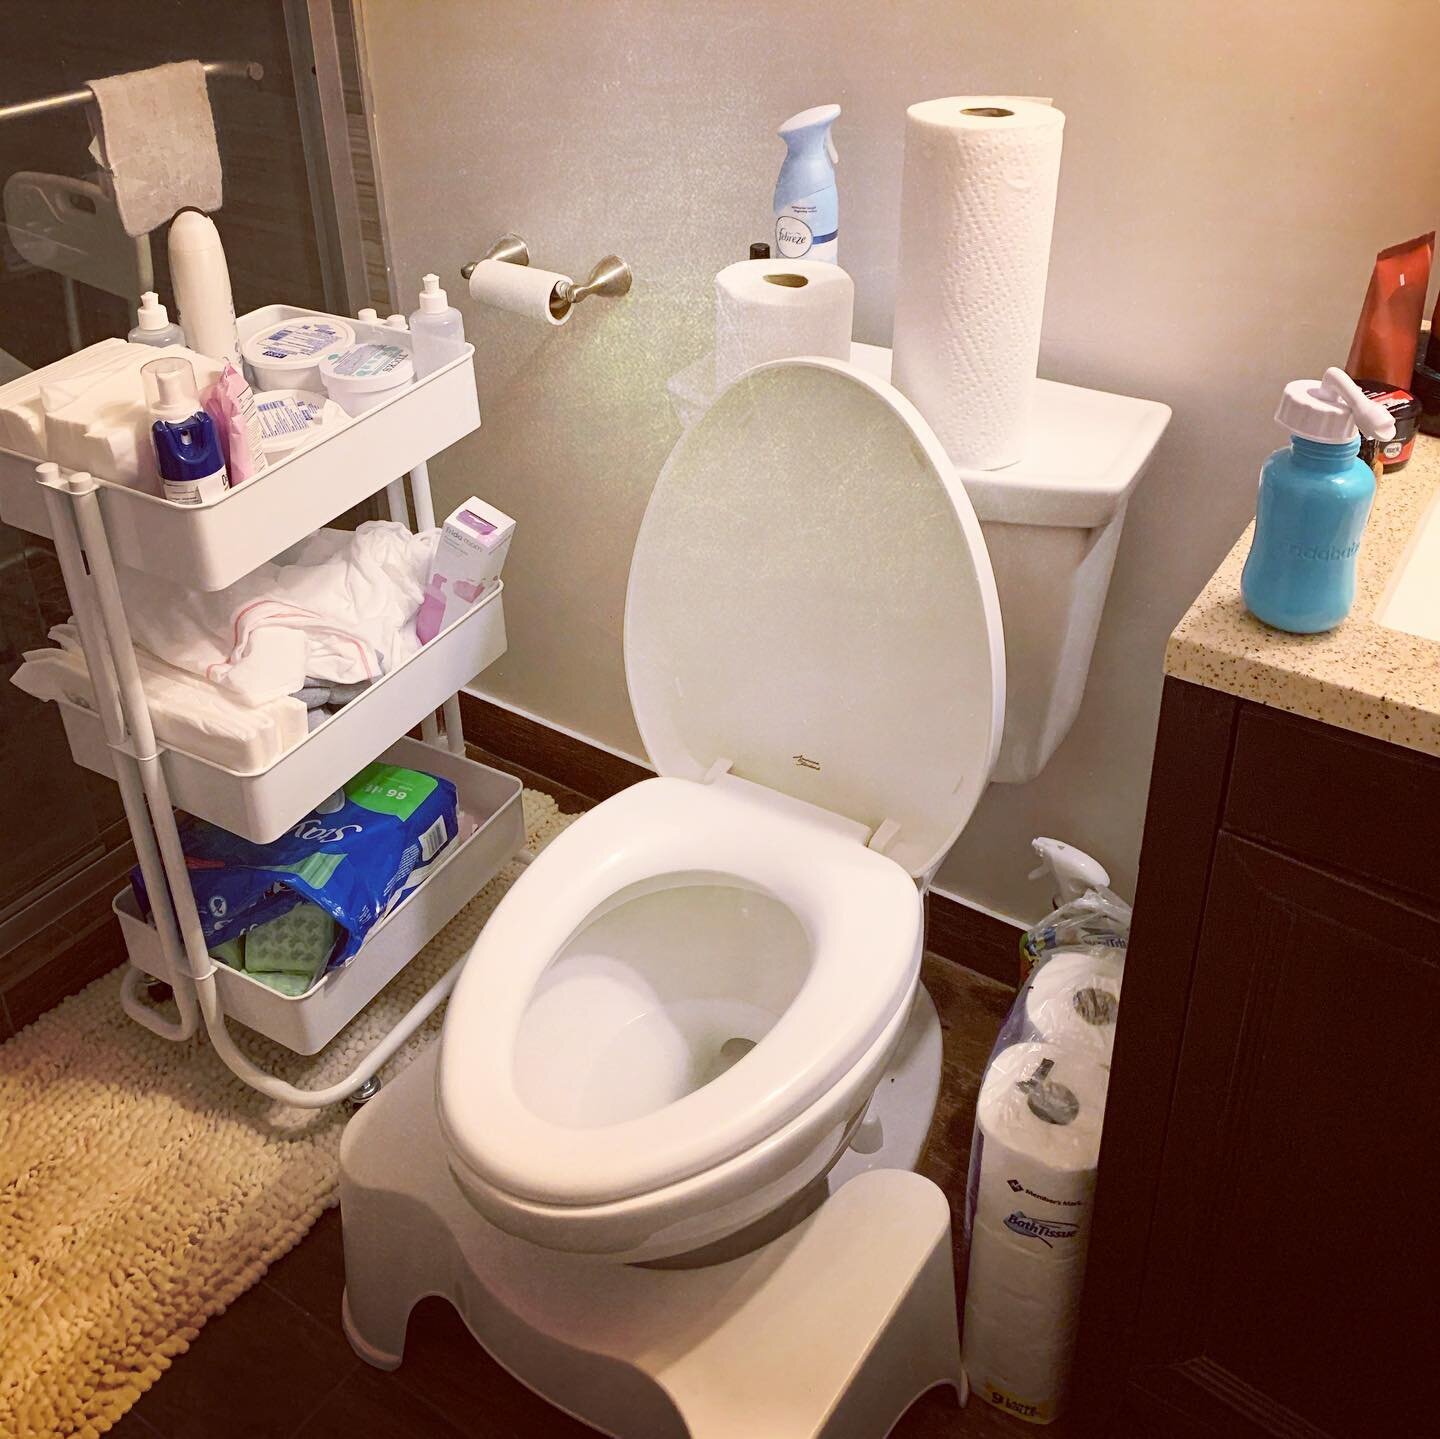 I was so impressed with this postpartum set up, I wanted to show you all! This three tiered cart was originally a pumping cart but was turned into a postpartum cart in the mean time. I love how everything is organized!

What was your favorite postpar